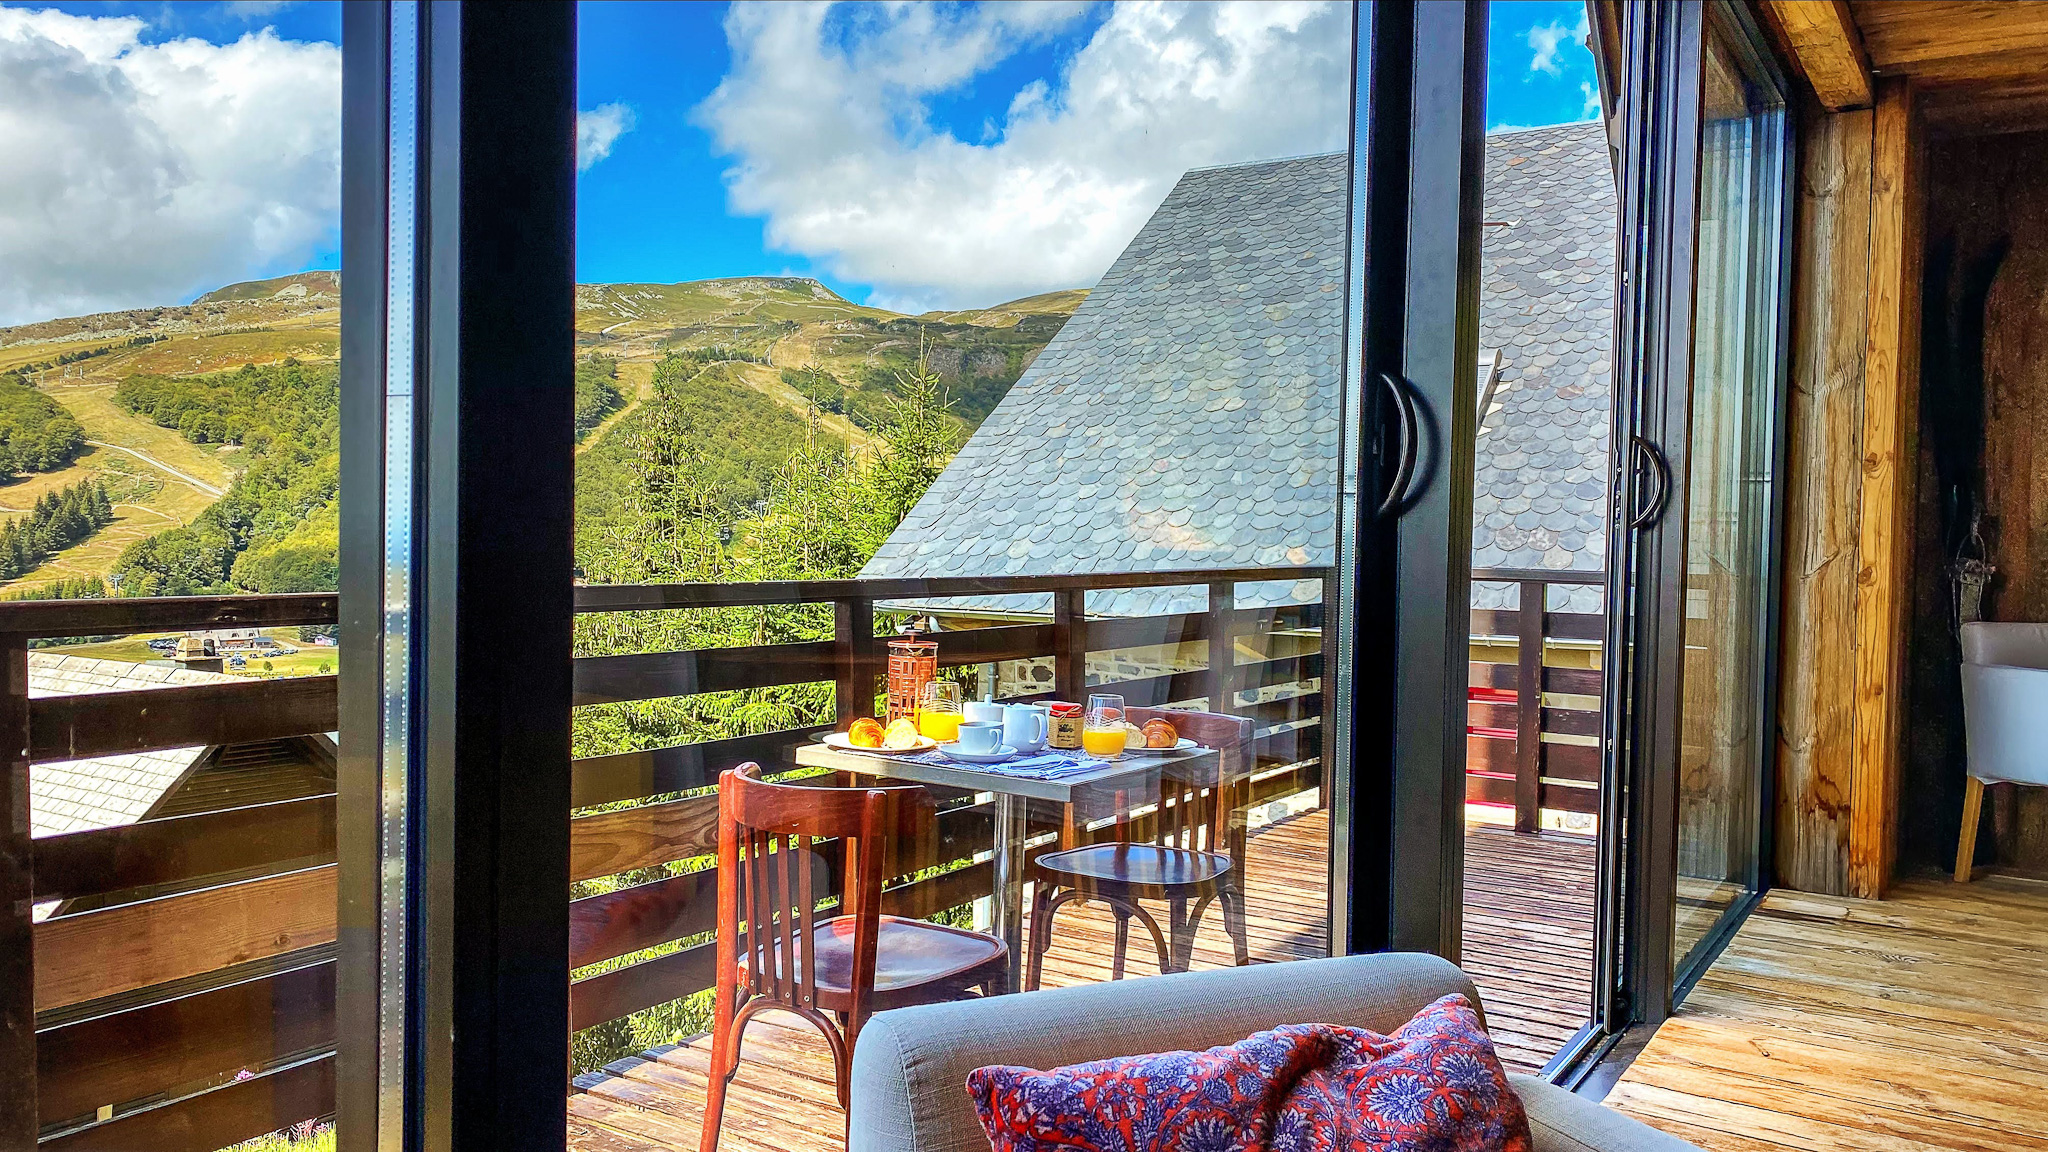 Chalet l'Anorak Super Besse, break from the Balcony with a view of the Massif du Sancy